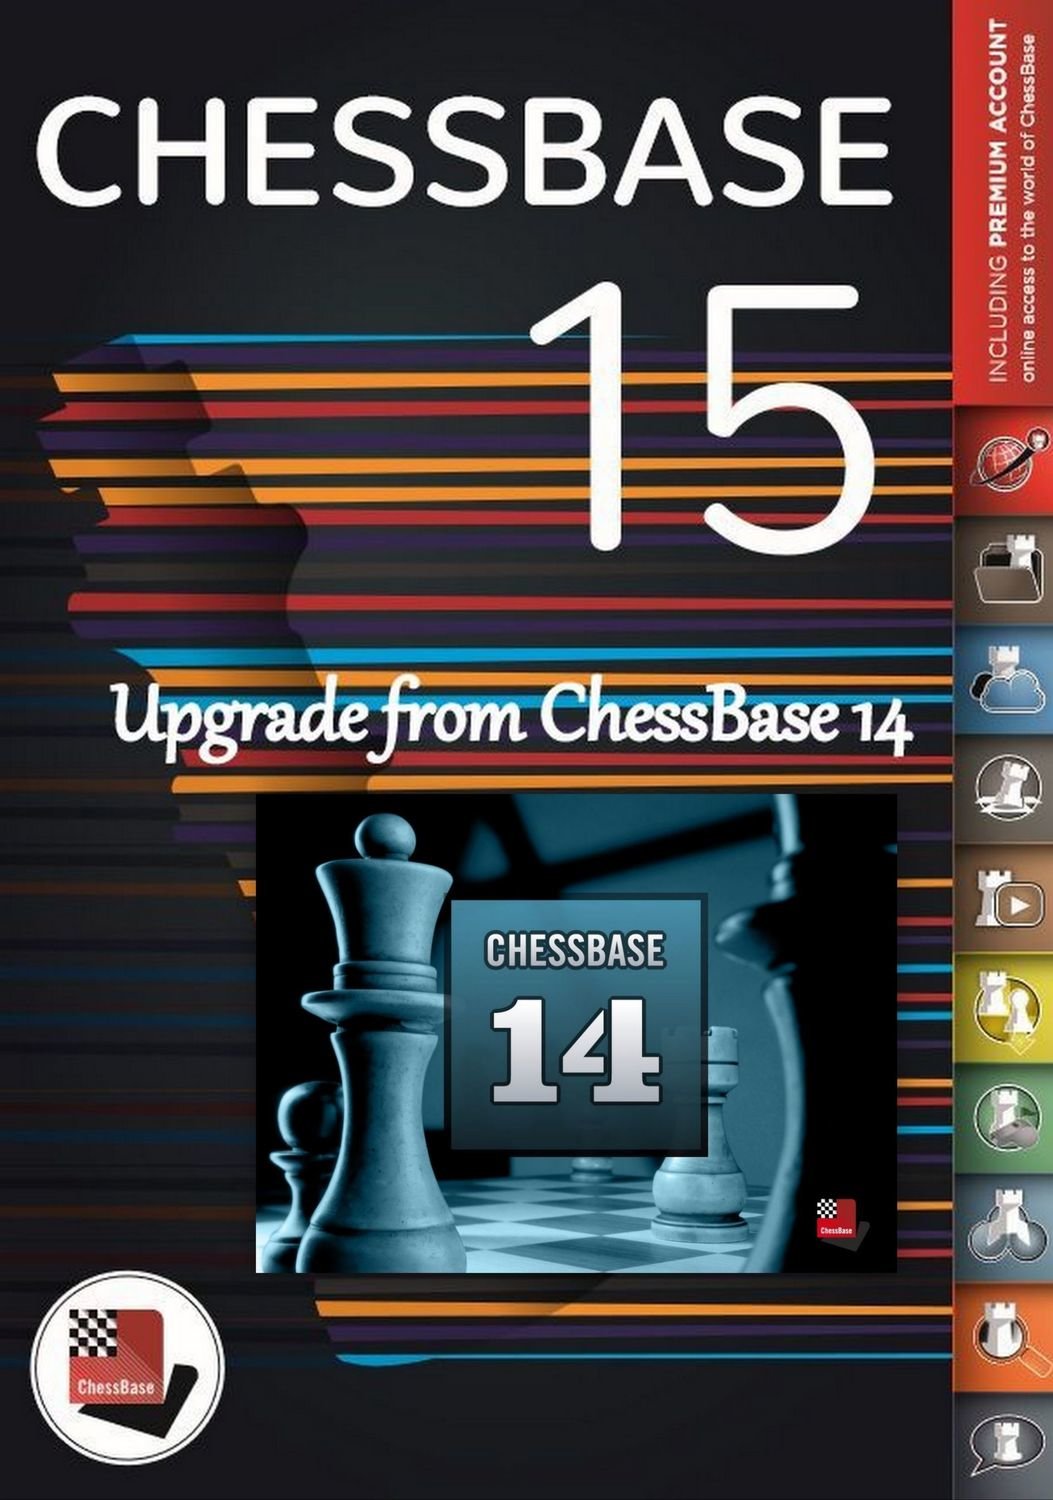 Tactical Analysis and Assisted Analysis in ChessBase 14